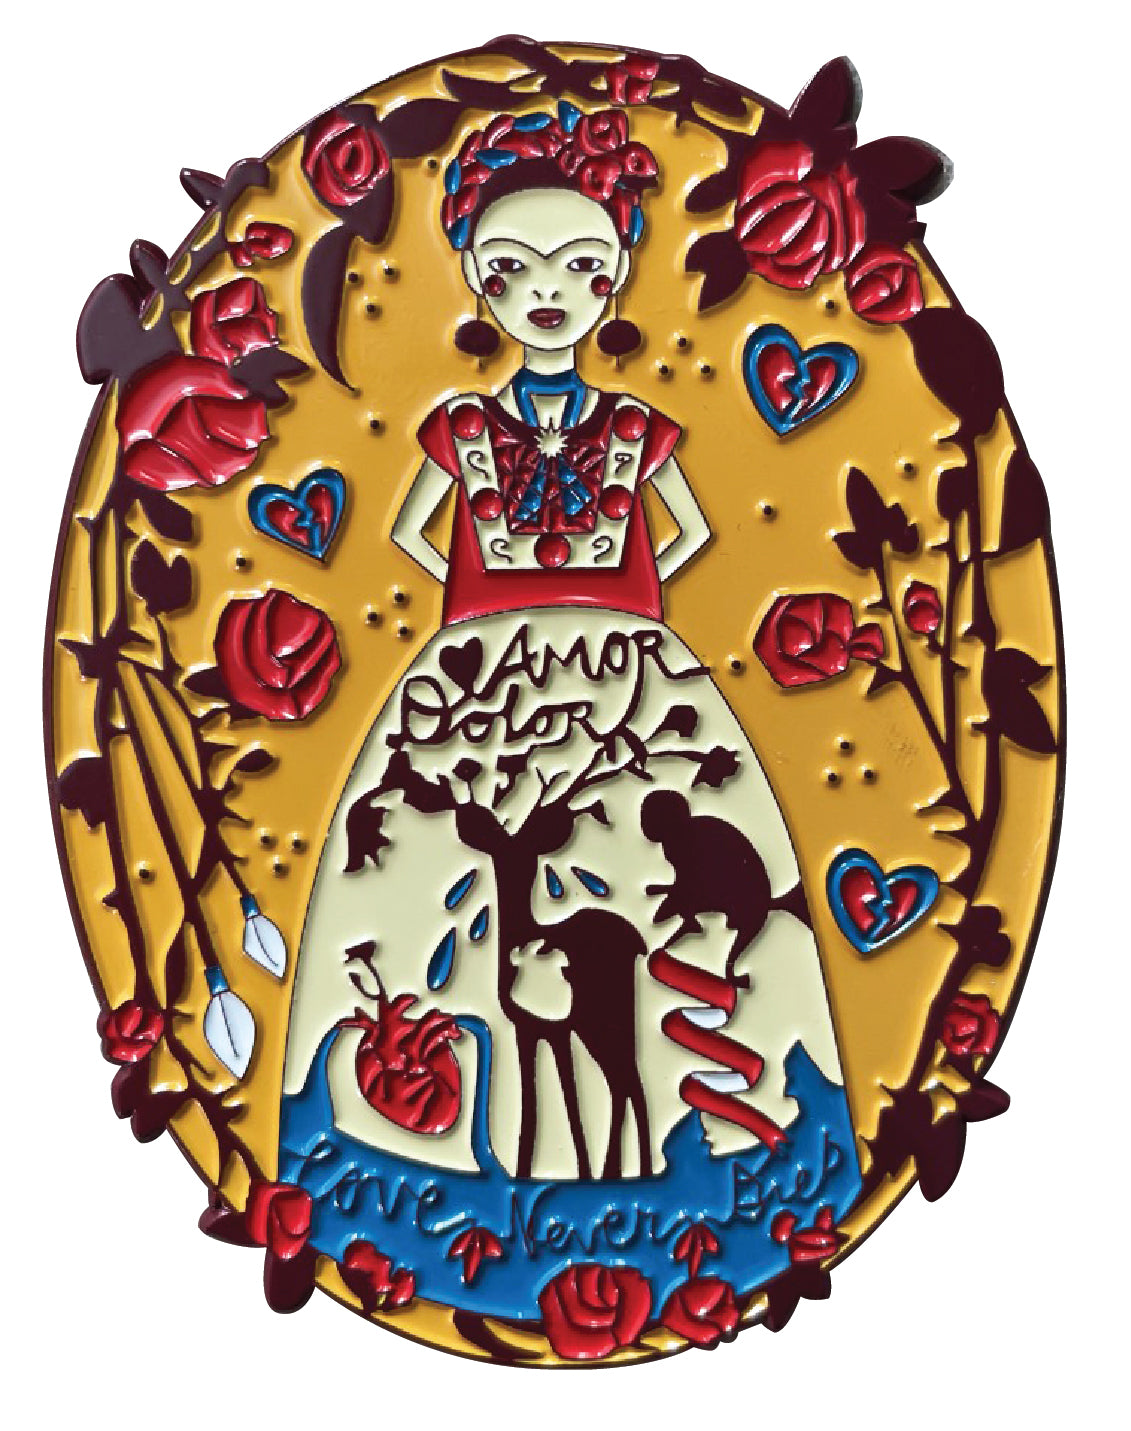 Yellow, red, blue and white enamel pin featuring a female artist, deer, monkey, and flowers with "Love Never Dies" text